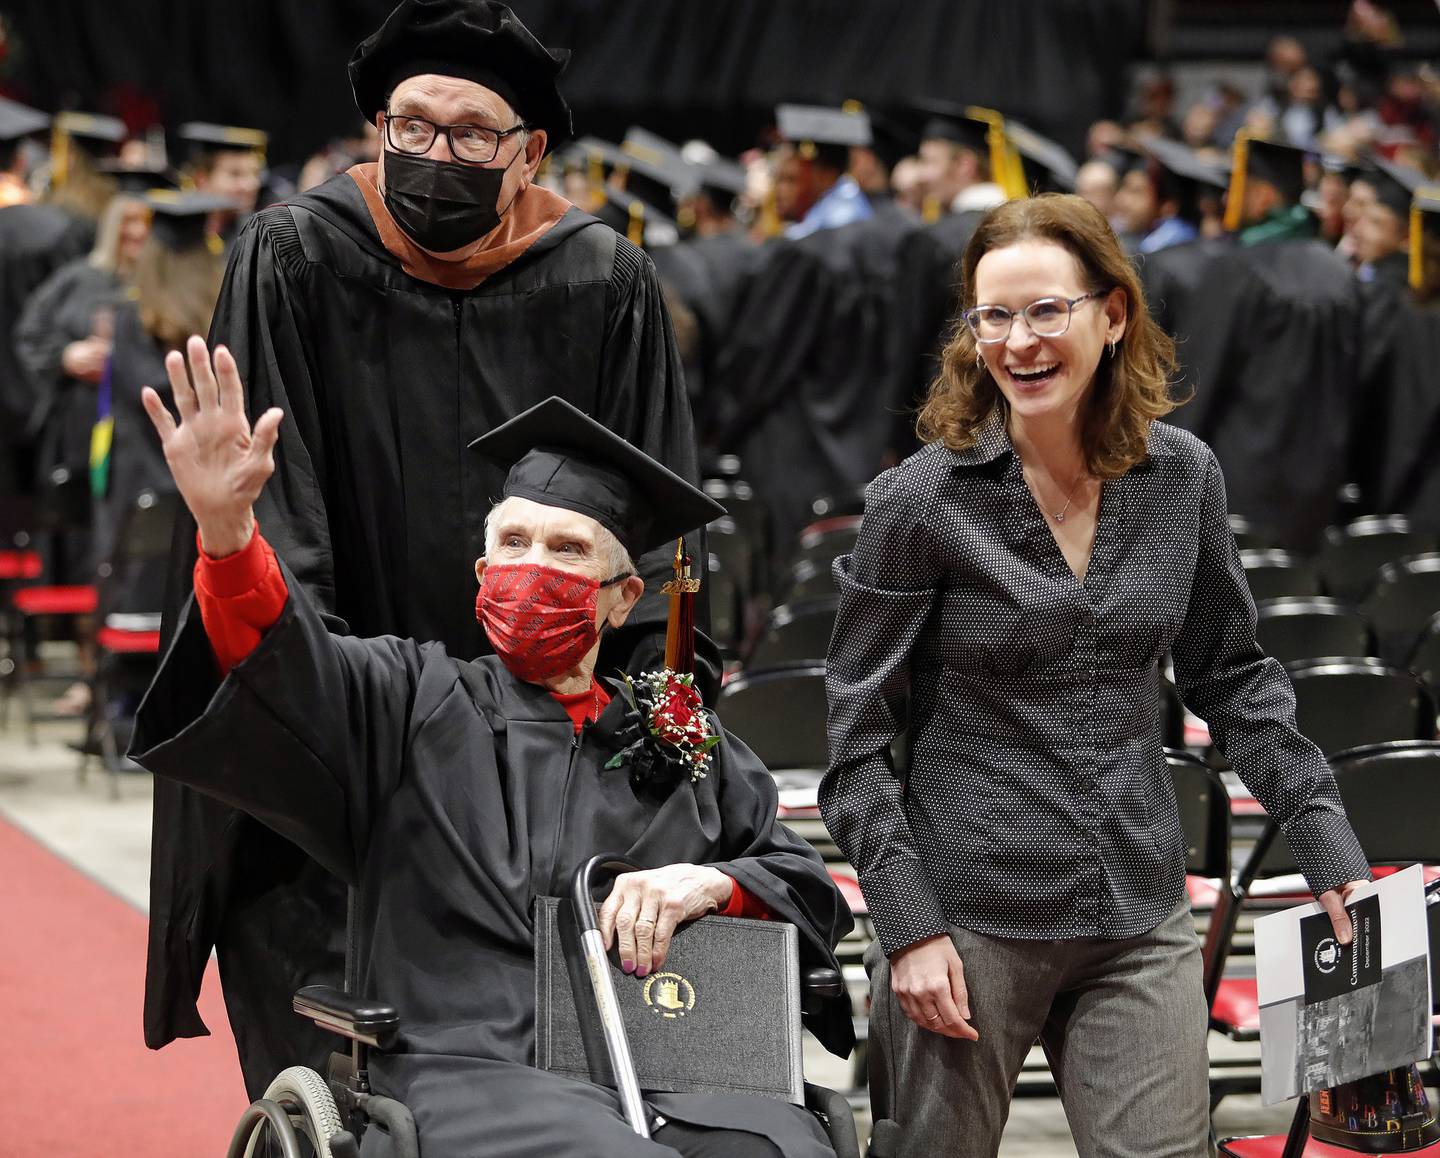 Graduate Joyce DeFauw, 90, waves to family as she is escorted by her granddaughter Jenna Dooley on Dec. 11, 2022.